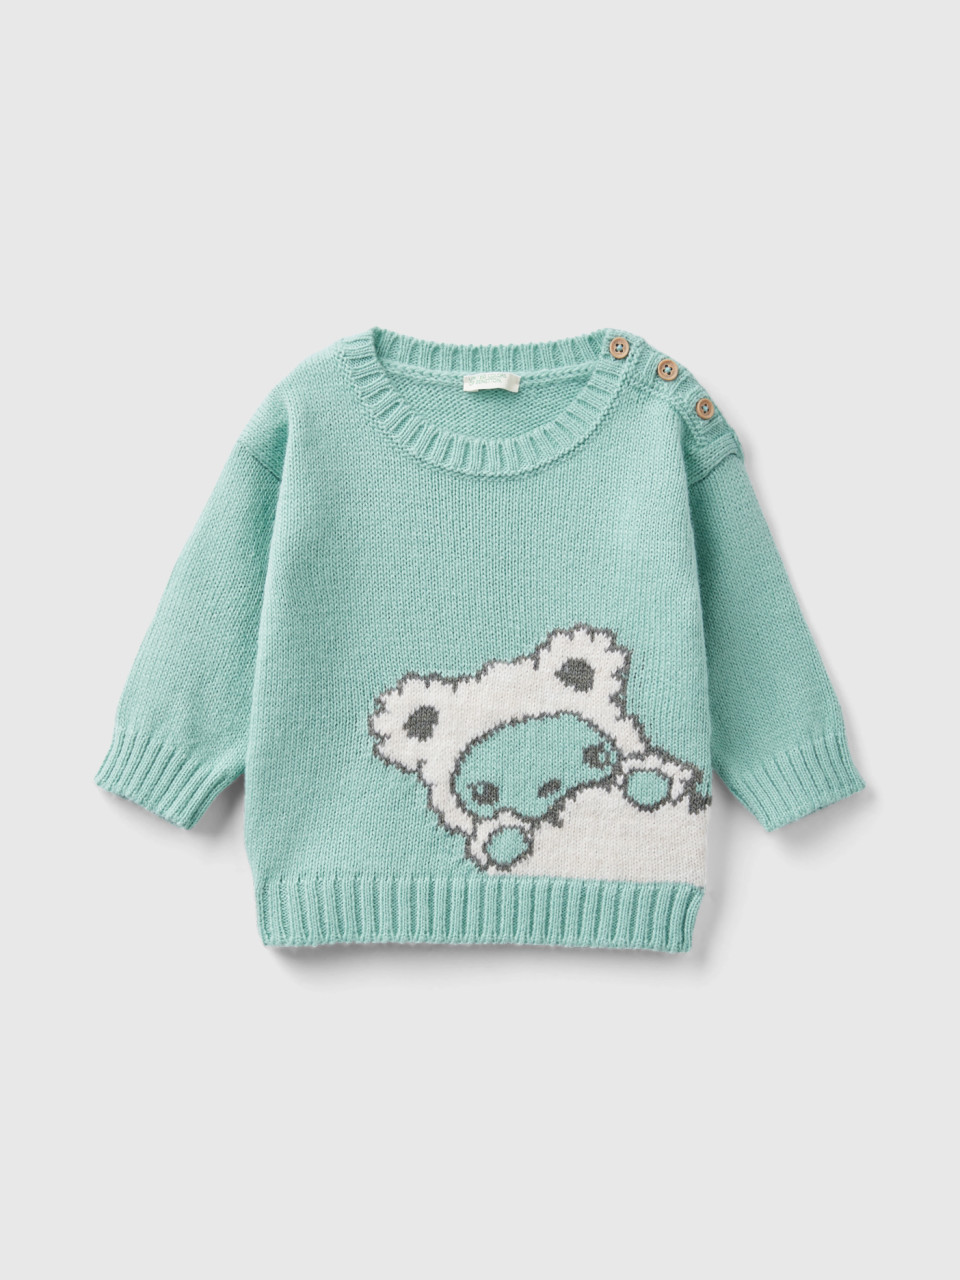 Benetton, Sweater With Inlay, Green, Kids